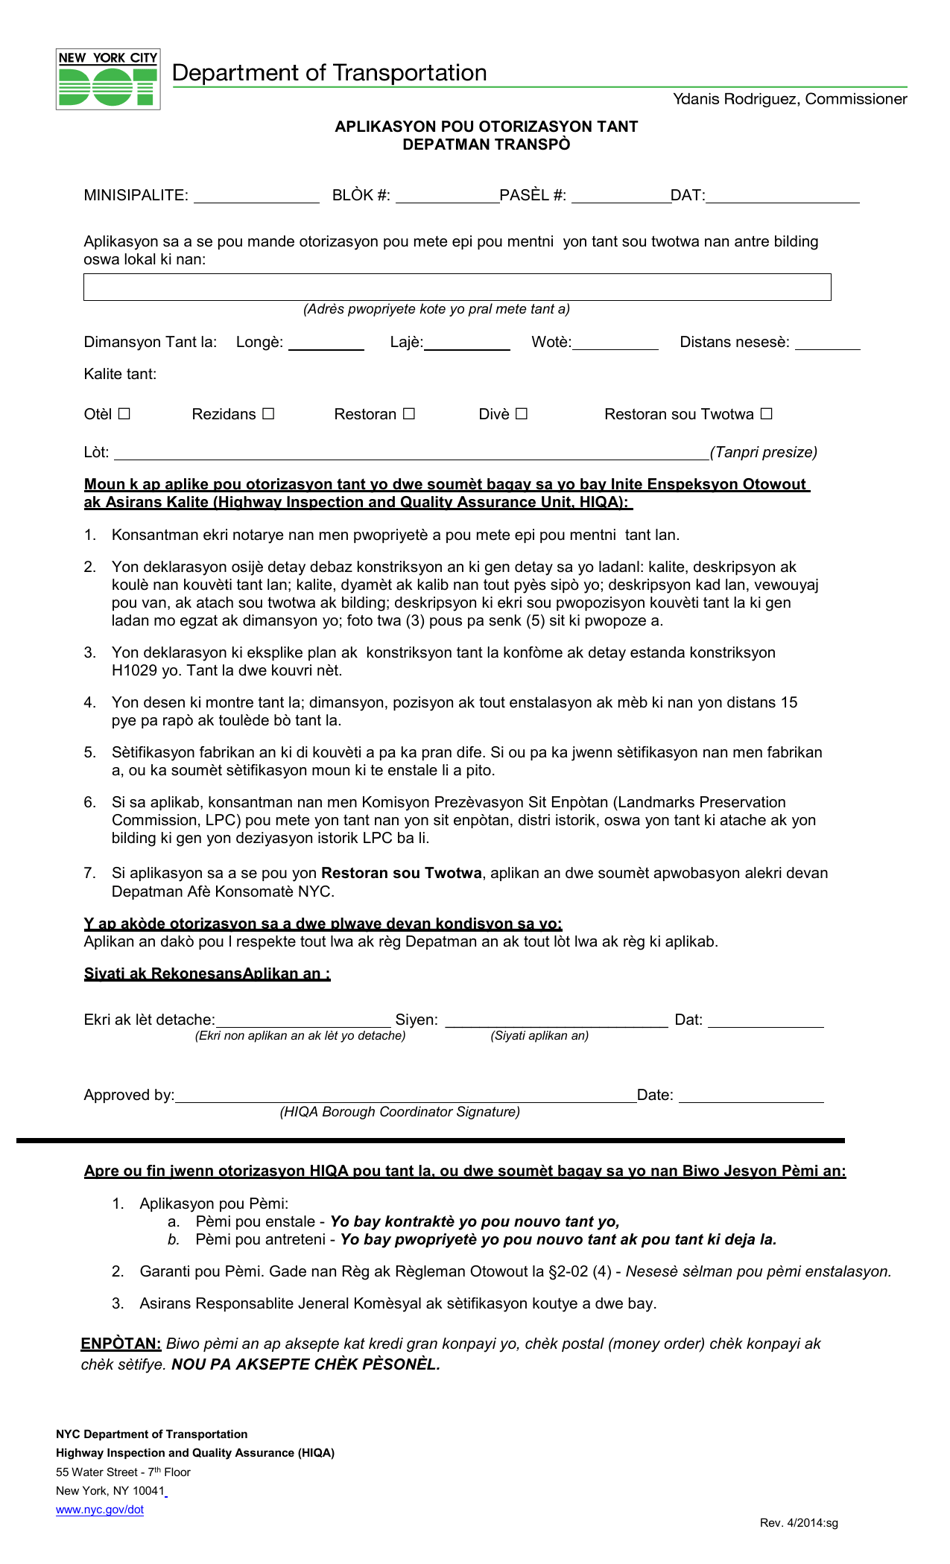 Canopy Authorization Application - New York City (Haitian Creole), Page 1